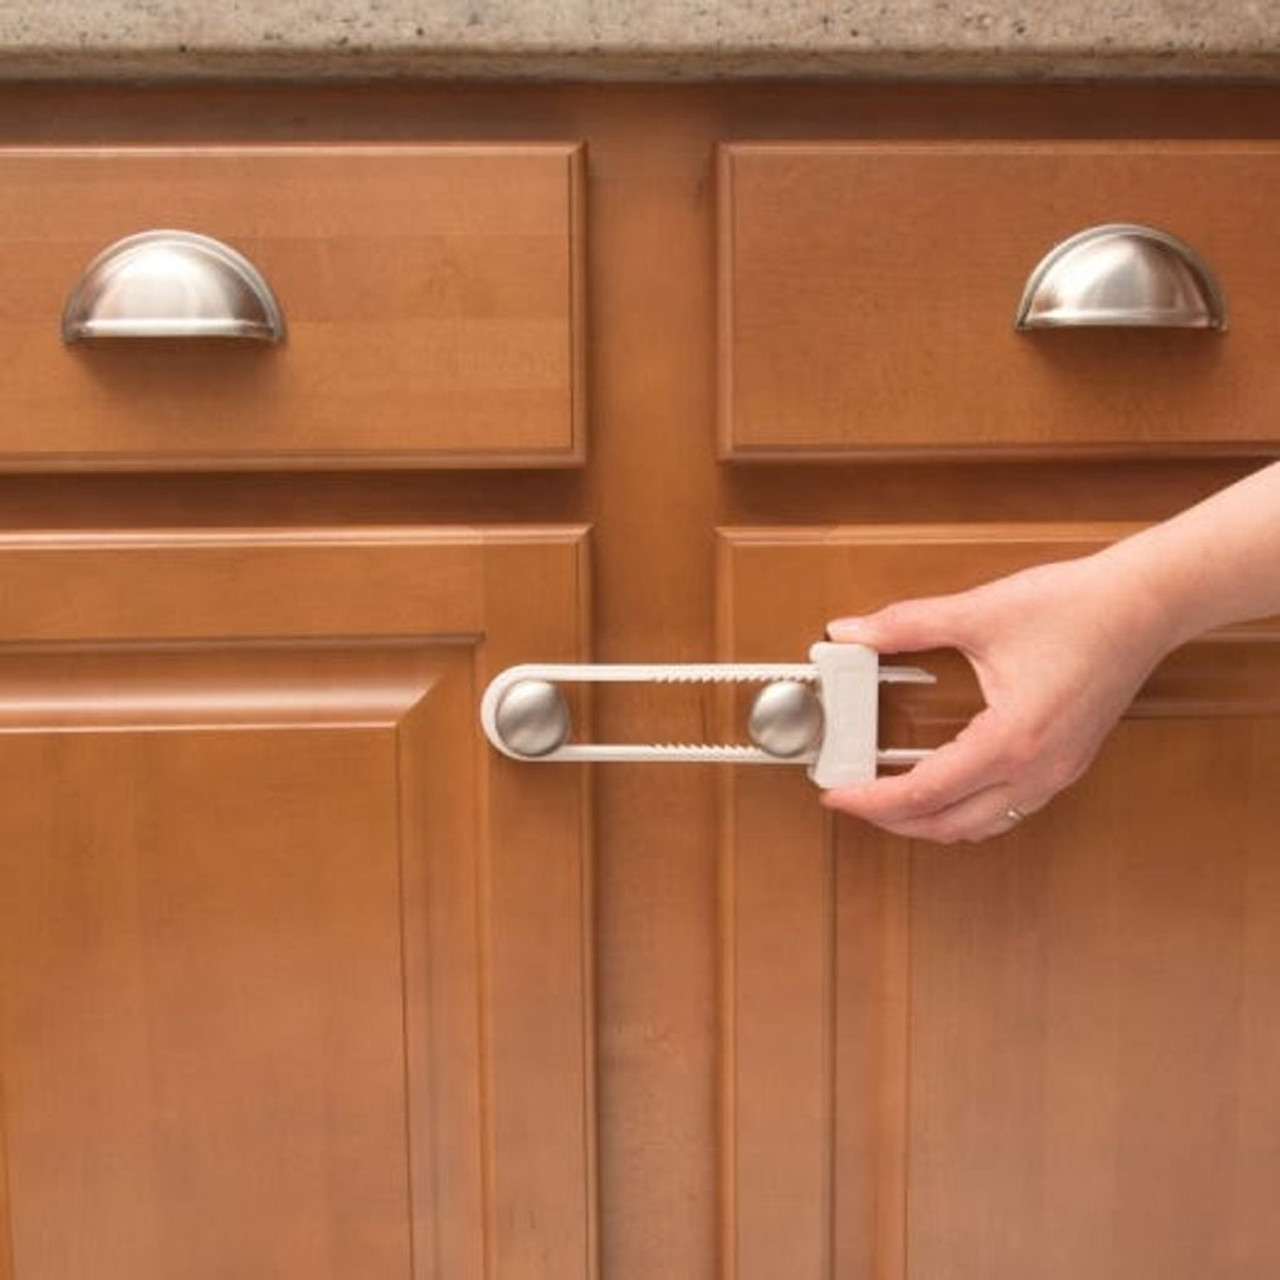 How to Install Safety 1st Spring Loaded Cabinet & Drawer Latches